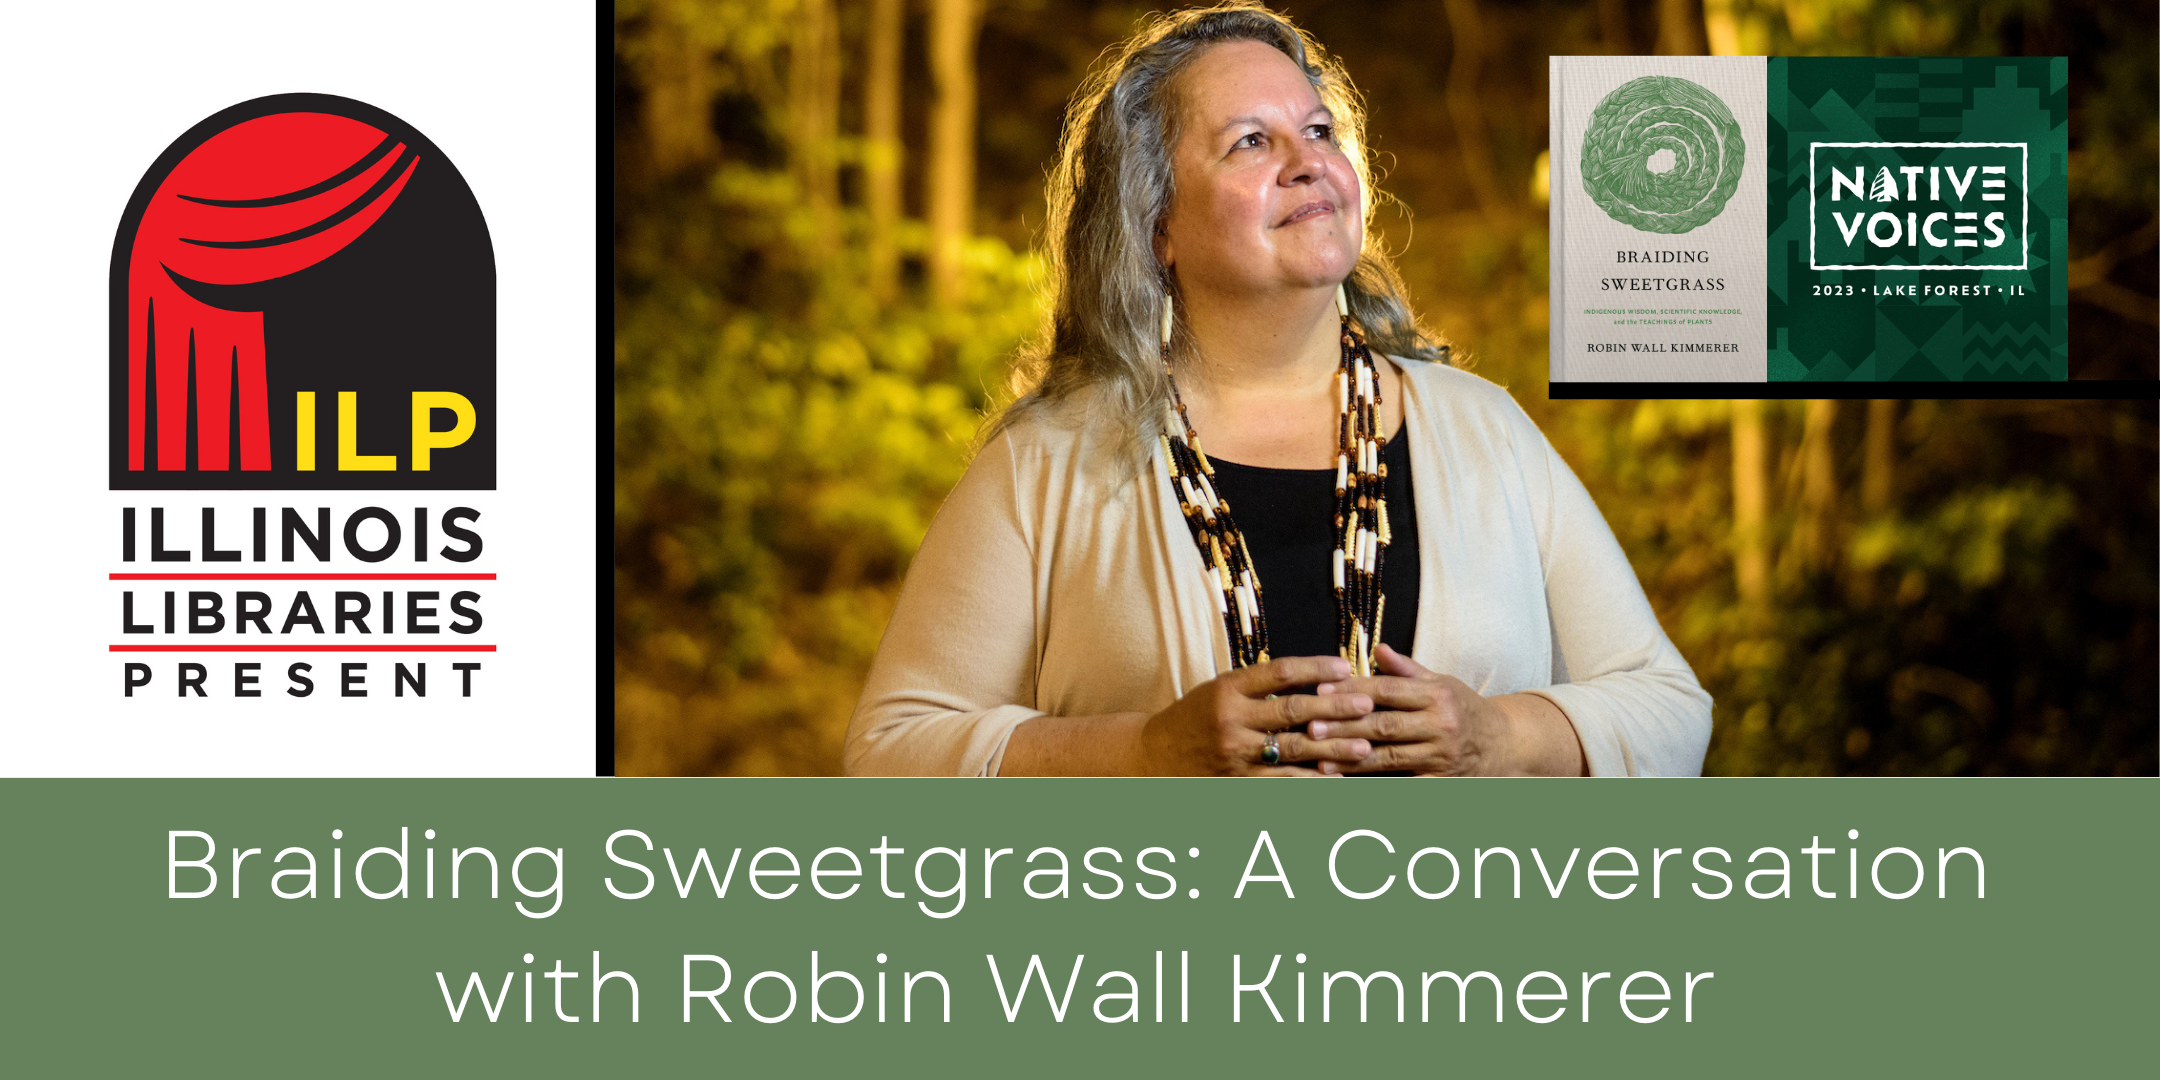 image of "Braiding Sweetgrass: A Conversation with Robin Wall Kimmerer"